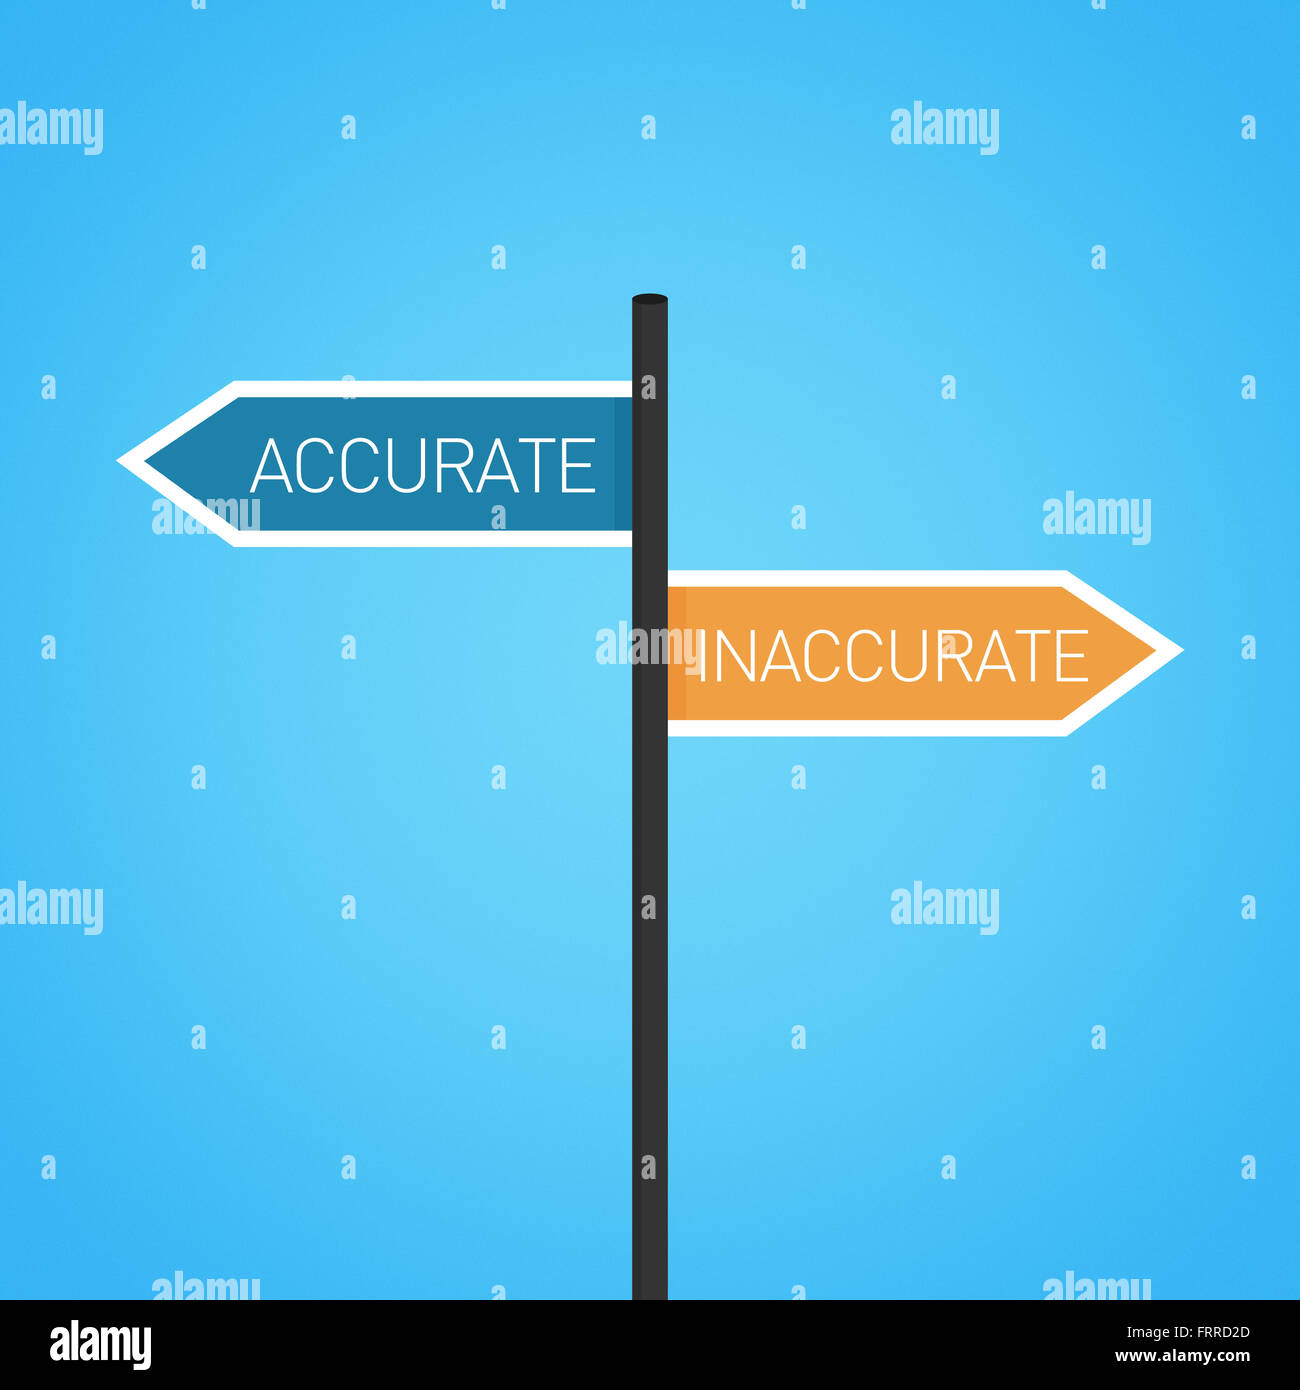 Accurate vs inaccurate choice road sign concept, flat design Stock Photo